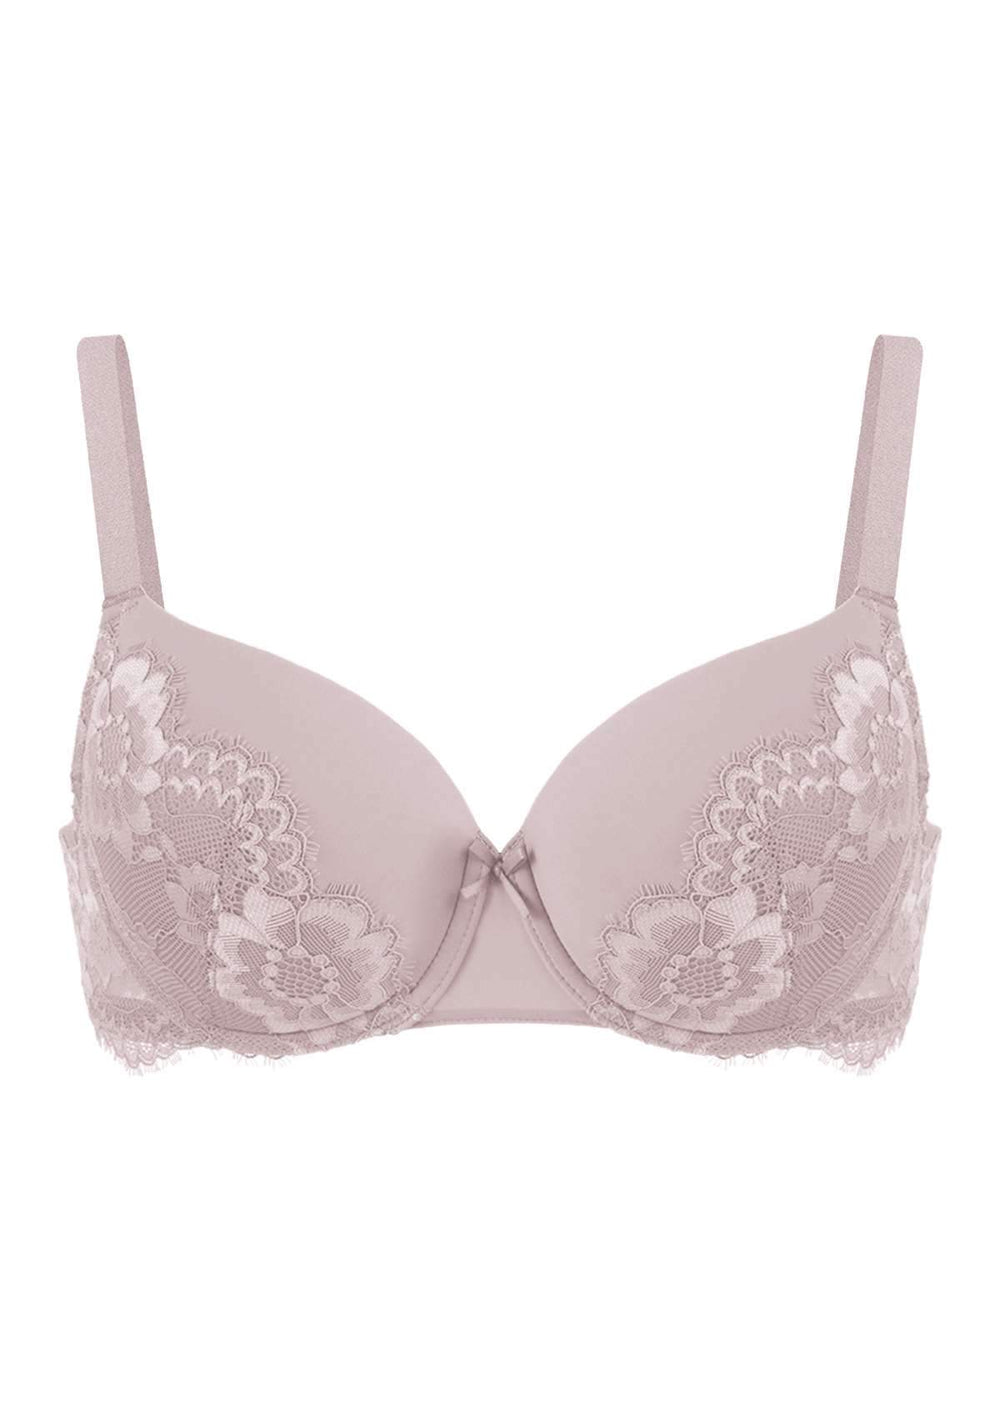 MUGUOY Winnie Blooms - Wireless Ultra-Supportive Double-Buckle Bra,Lift  Push Up Seamless Lace Bra with Front Buckle & Back Support,Plus Size Cup